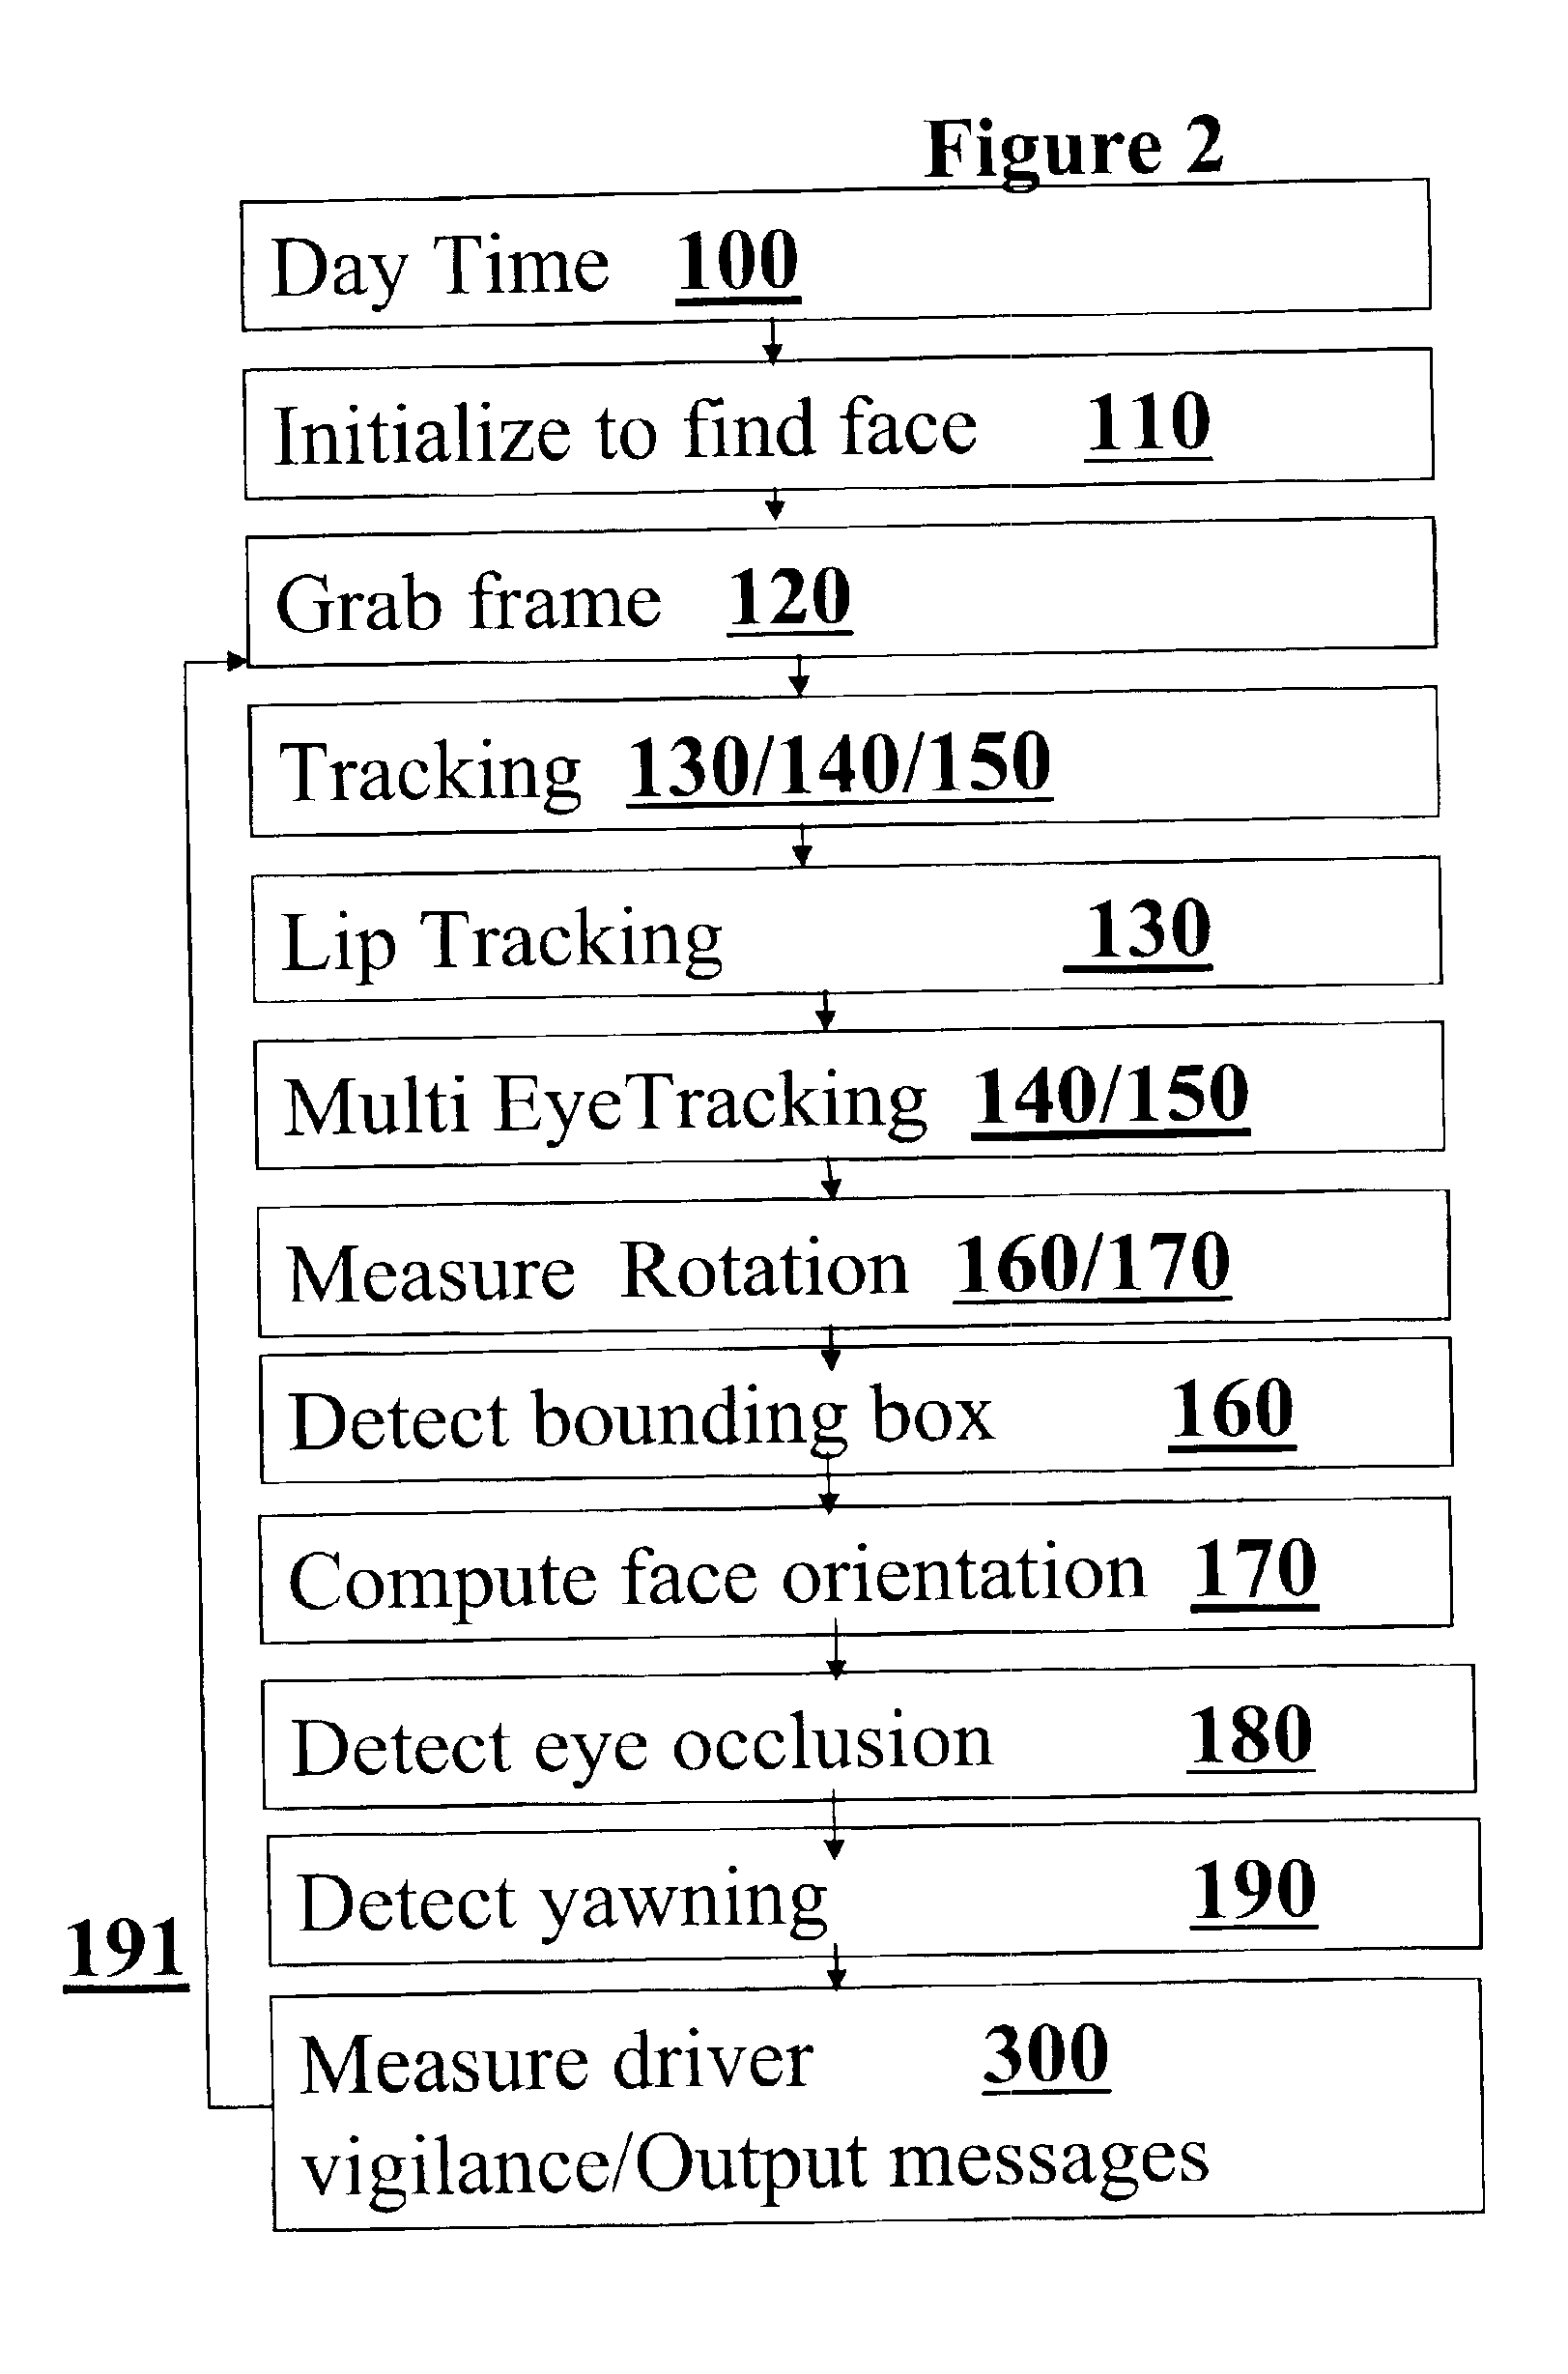 Algorithm for monitoring head/eye motion for driver alertness with one camera